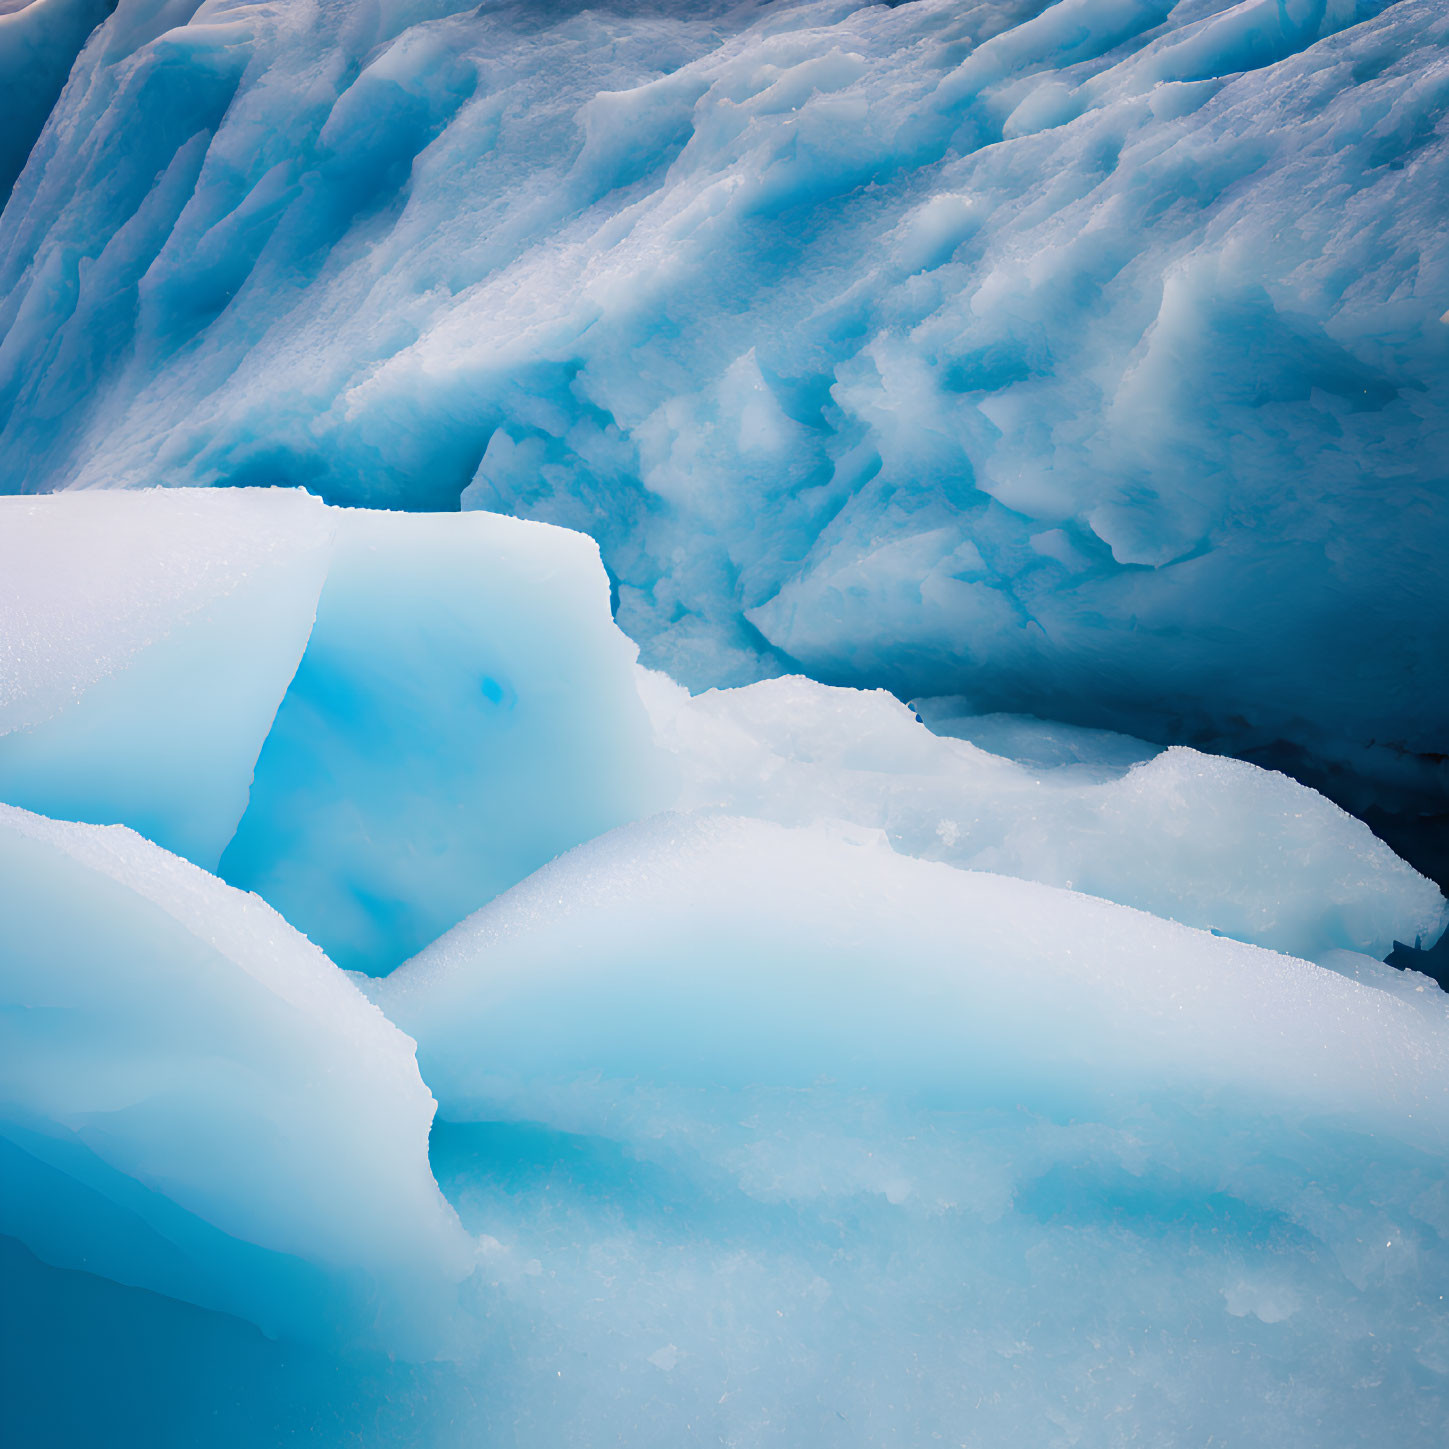 Detailed close-up of vivid blue and white glacial ice formation